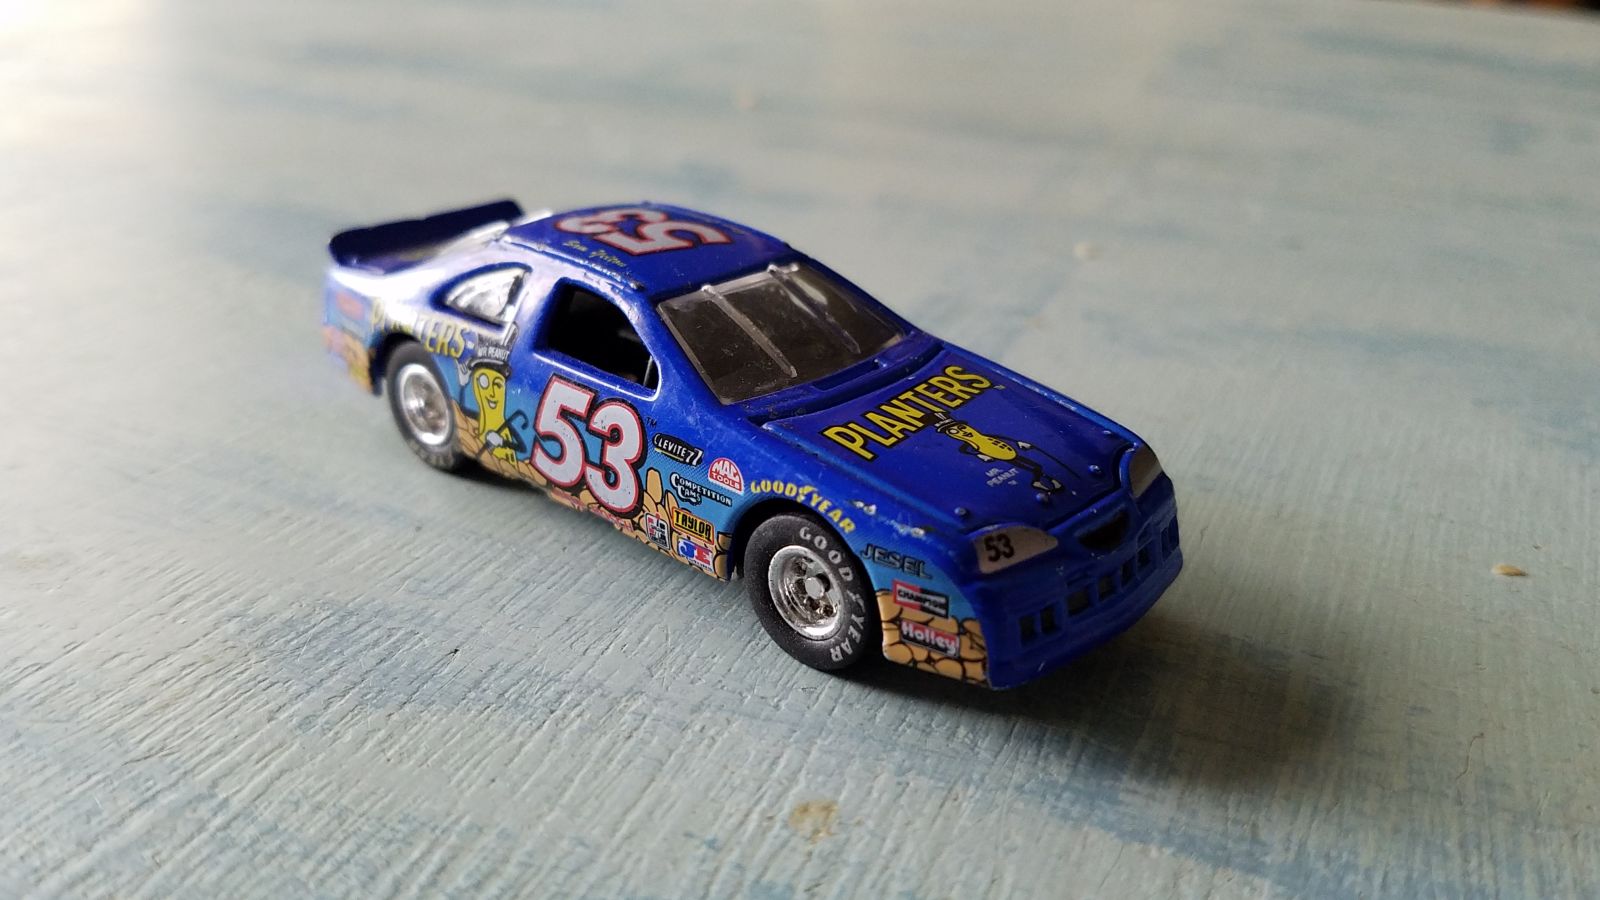 A Johnny Lightning stock car. I bought this one just for the wheels. Couldn’t pass up rubber Goodyears for 50 cents. 